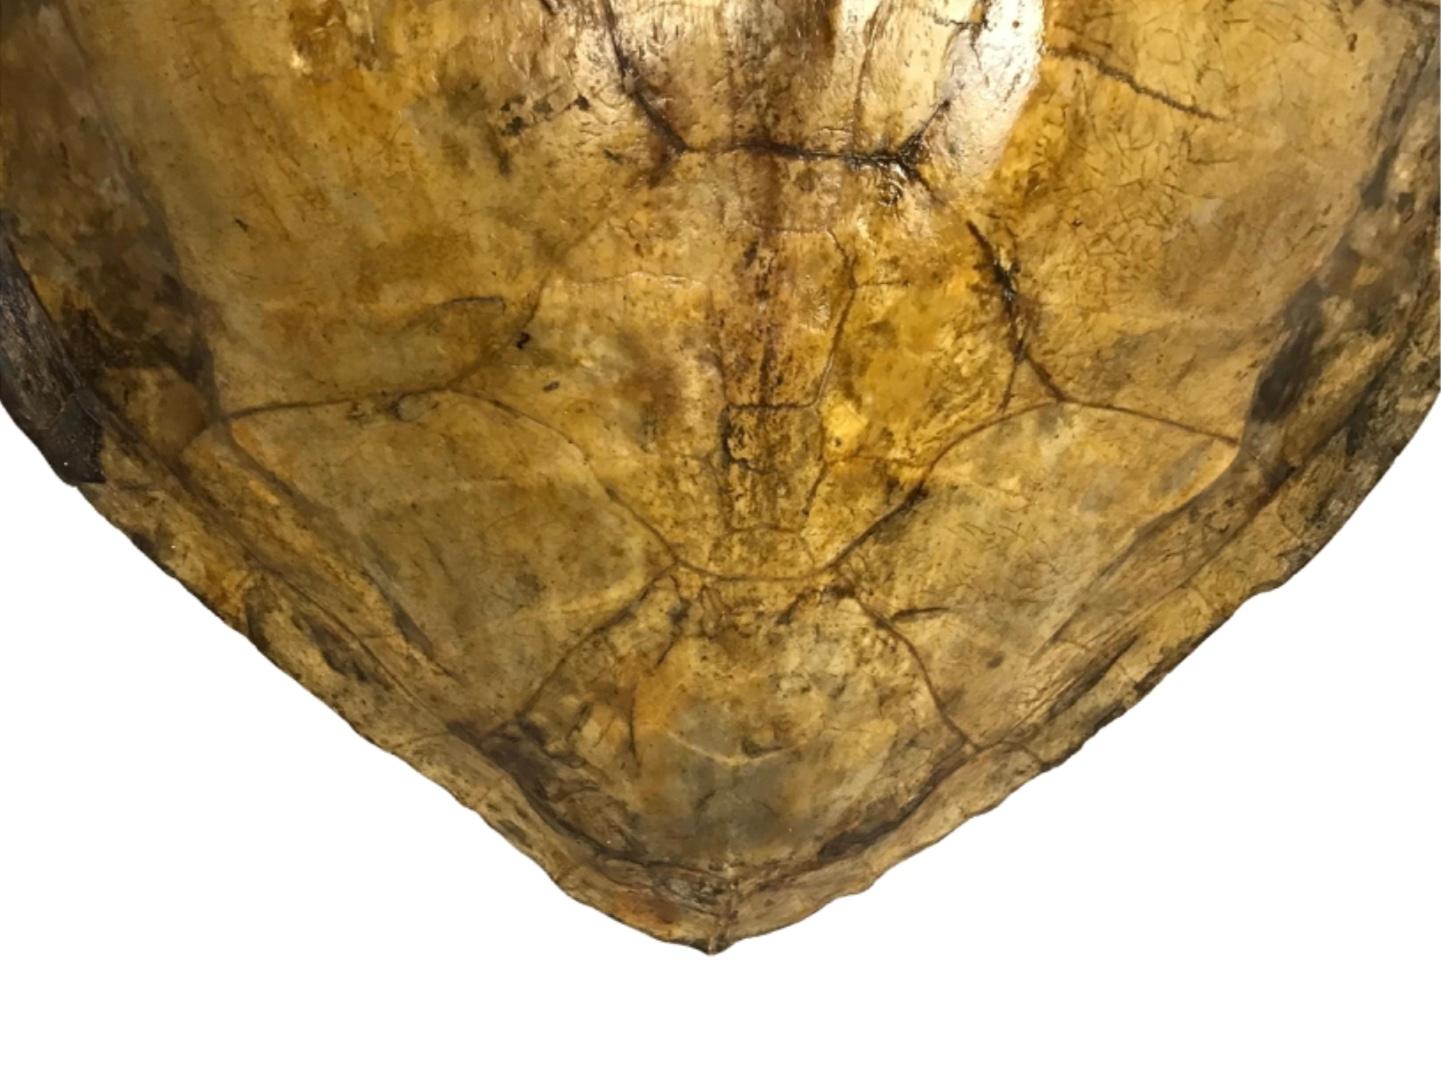 A large antique 19th-century giant sea turtle carapace (shell) specimen.
Authentic antique turtle shell. Elegant and mighty. A wonderfully naturalistic design tortoise shell.